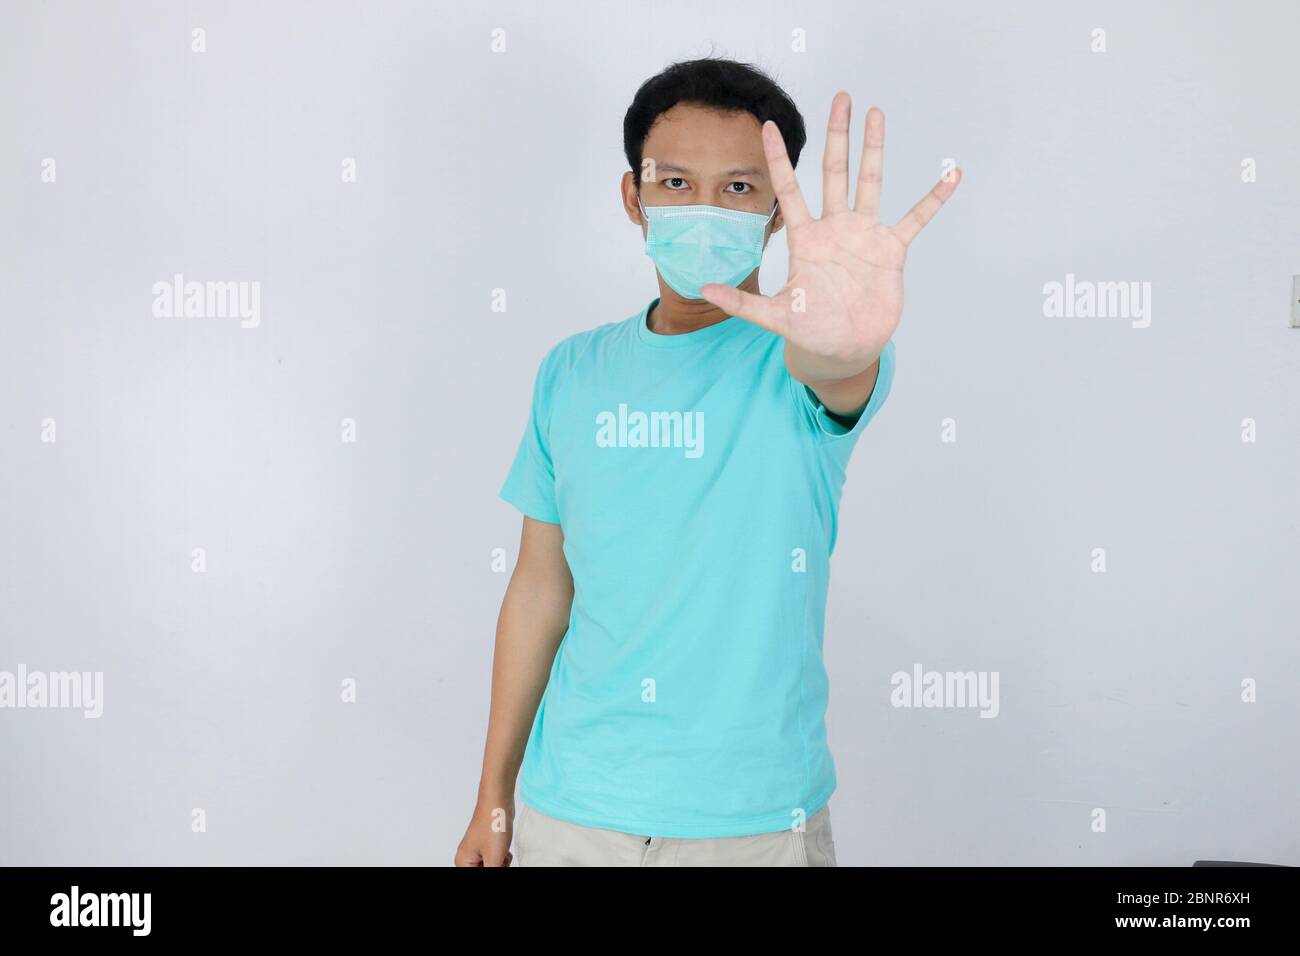 Young asian man wear hygienic mask is scared or panicking with gesturing stop hand. Afraid of coronavirus infection or respiratory illnesses such as f Stock Photo